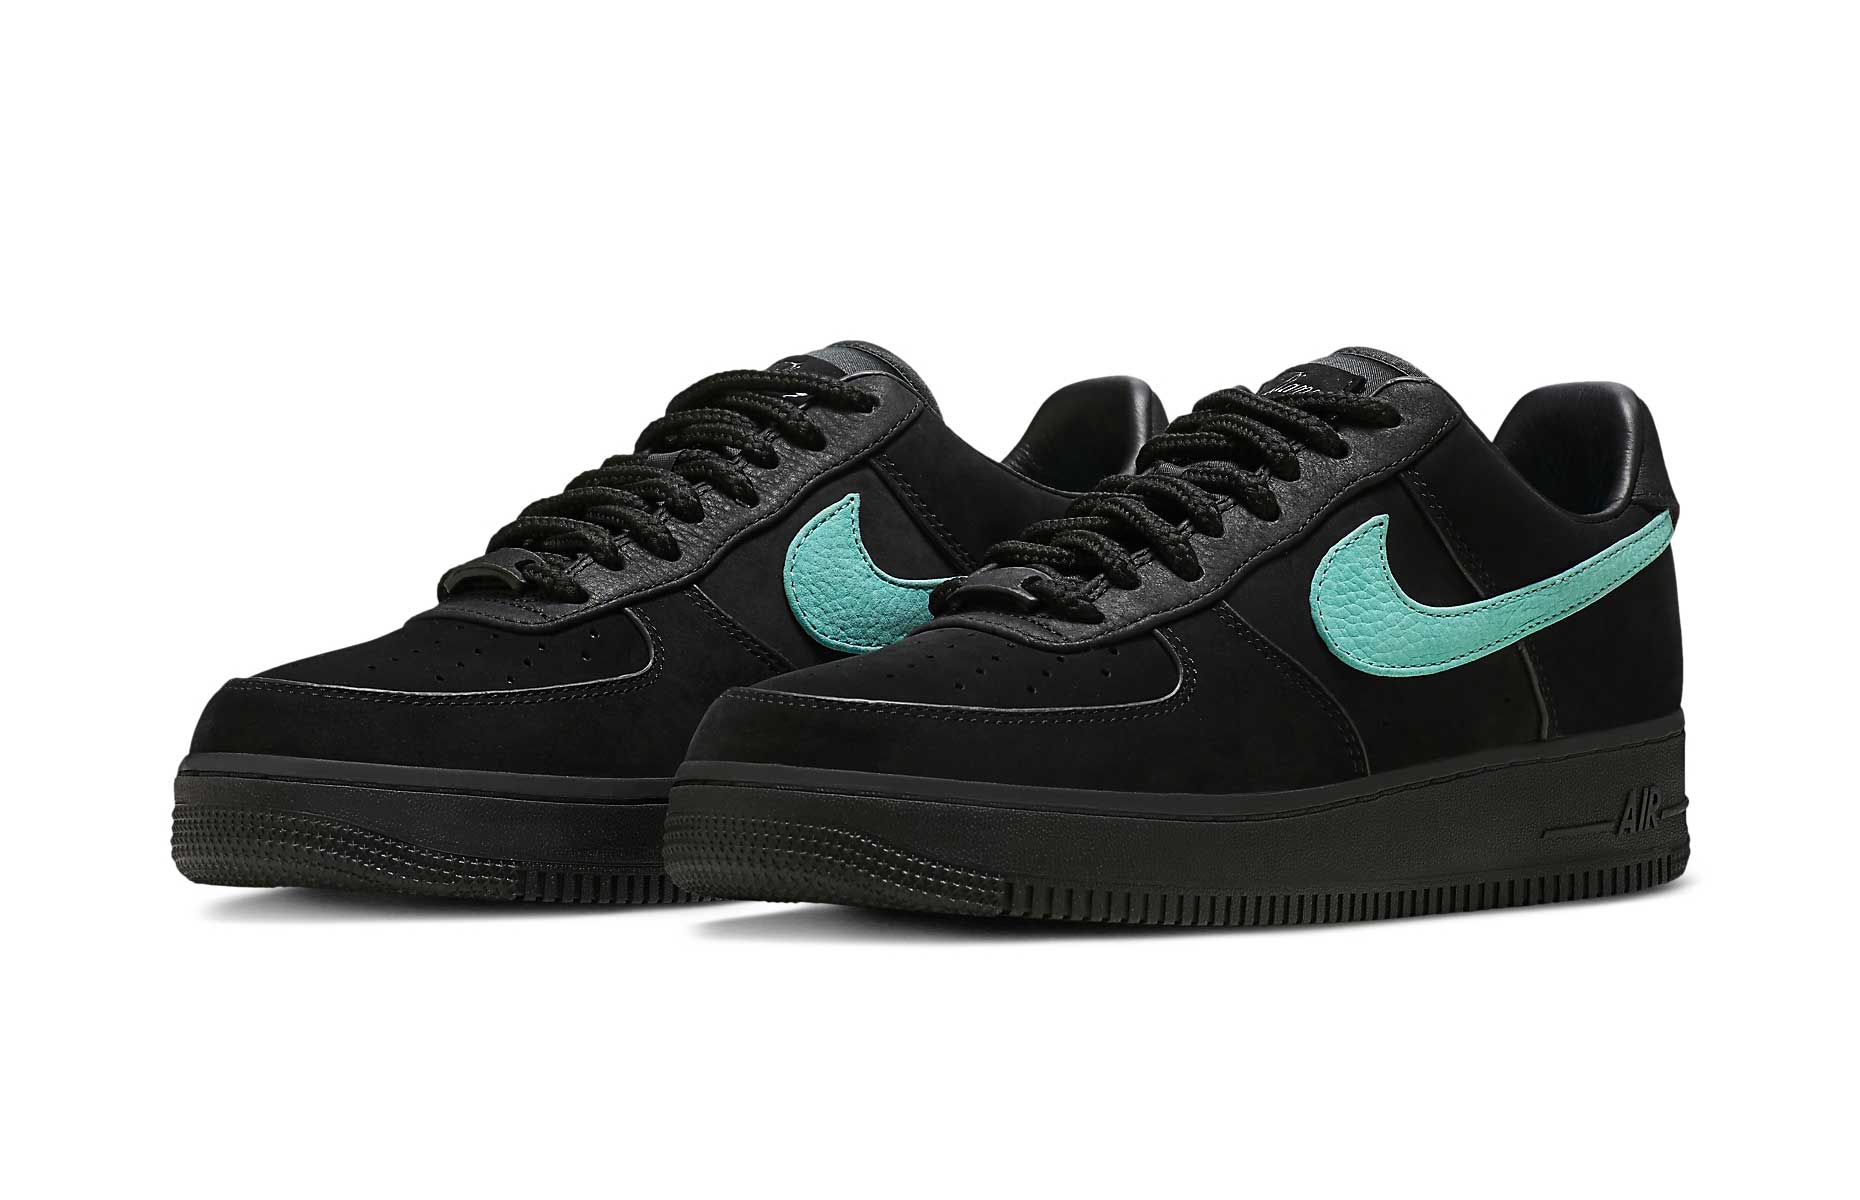 Nike Air Force 1 x Tiffany & Co. at Sneakersnstuff 